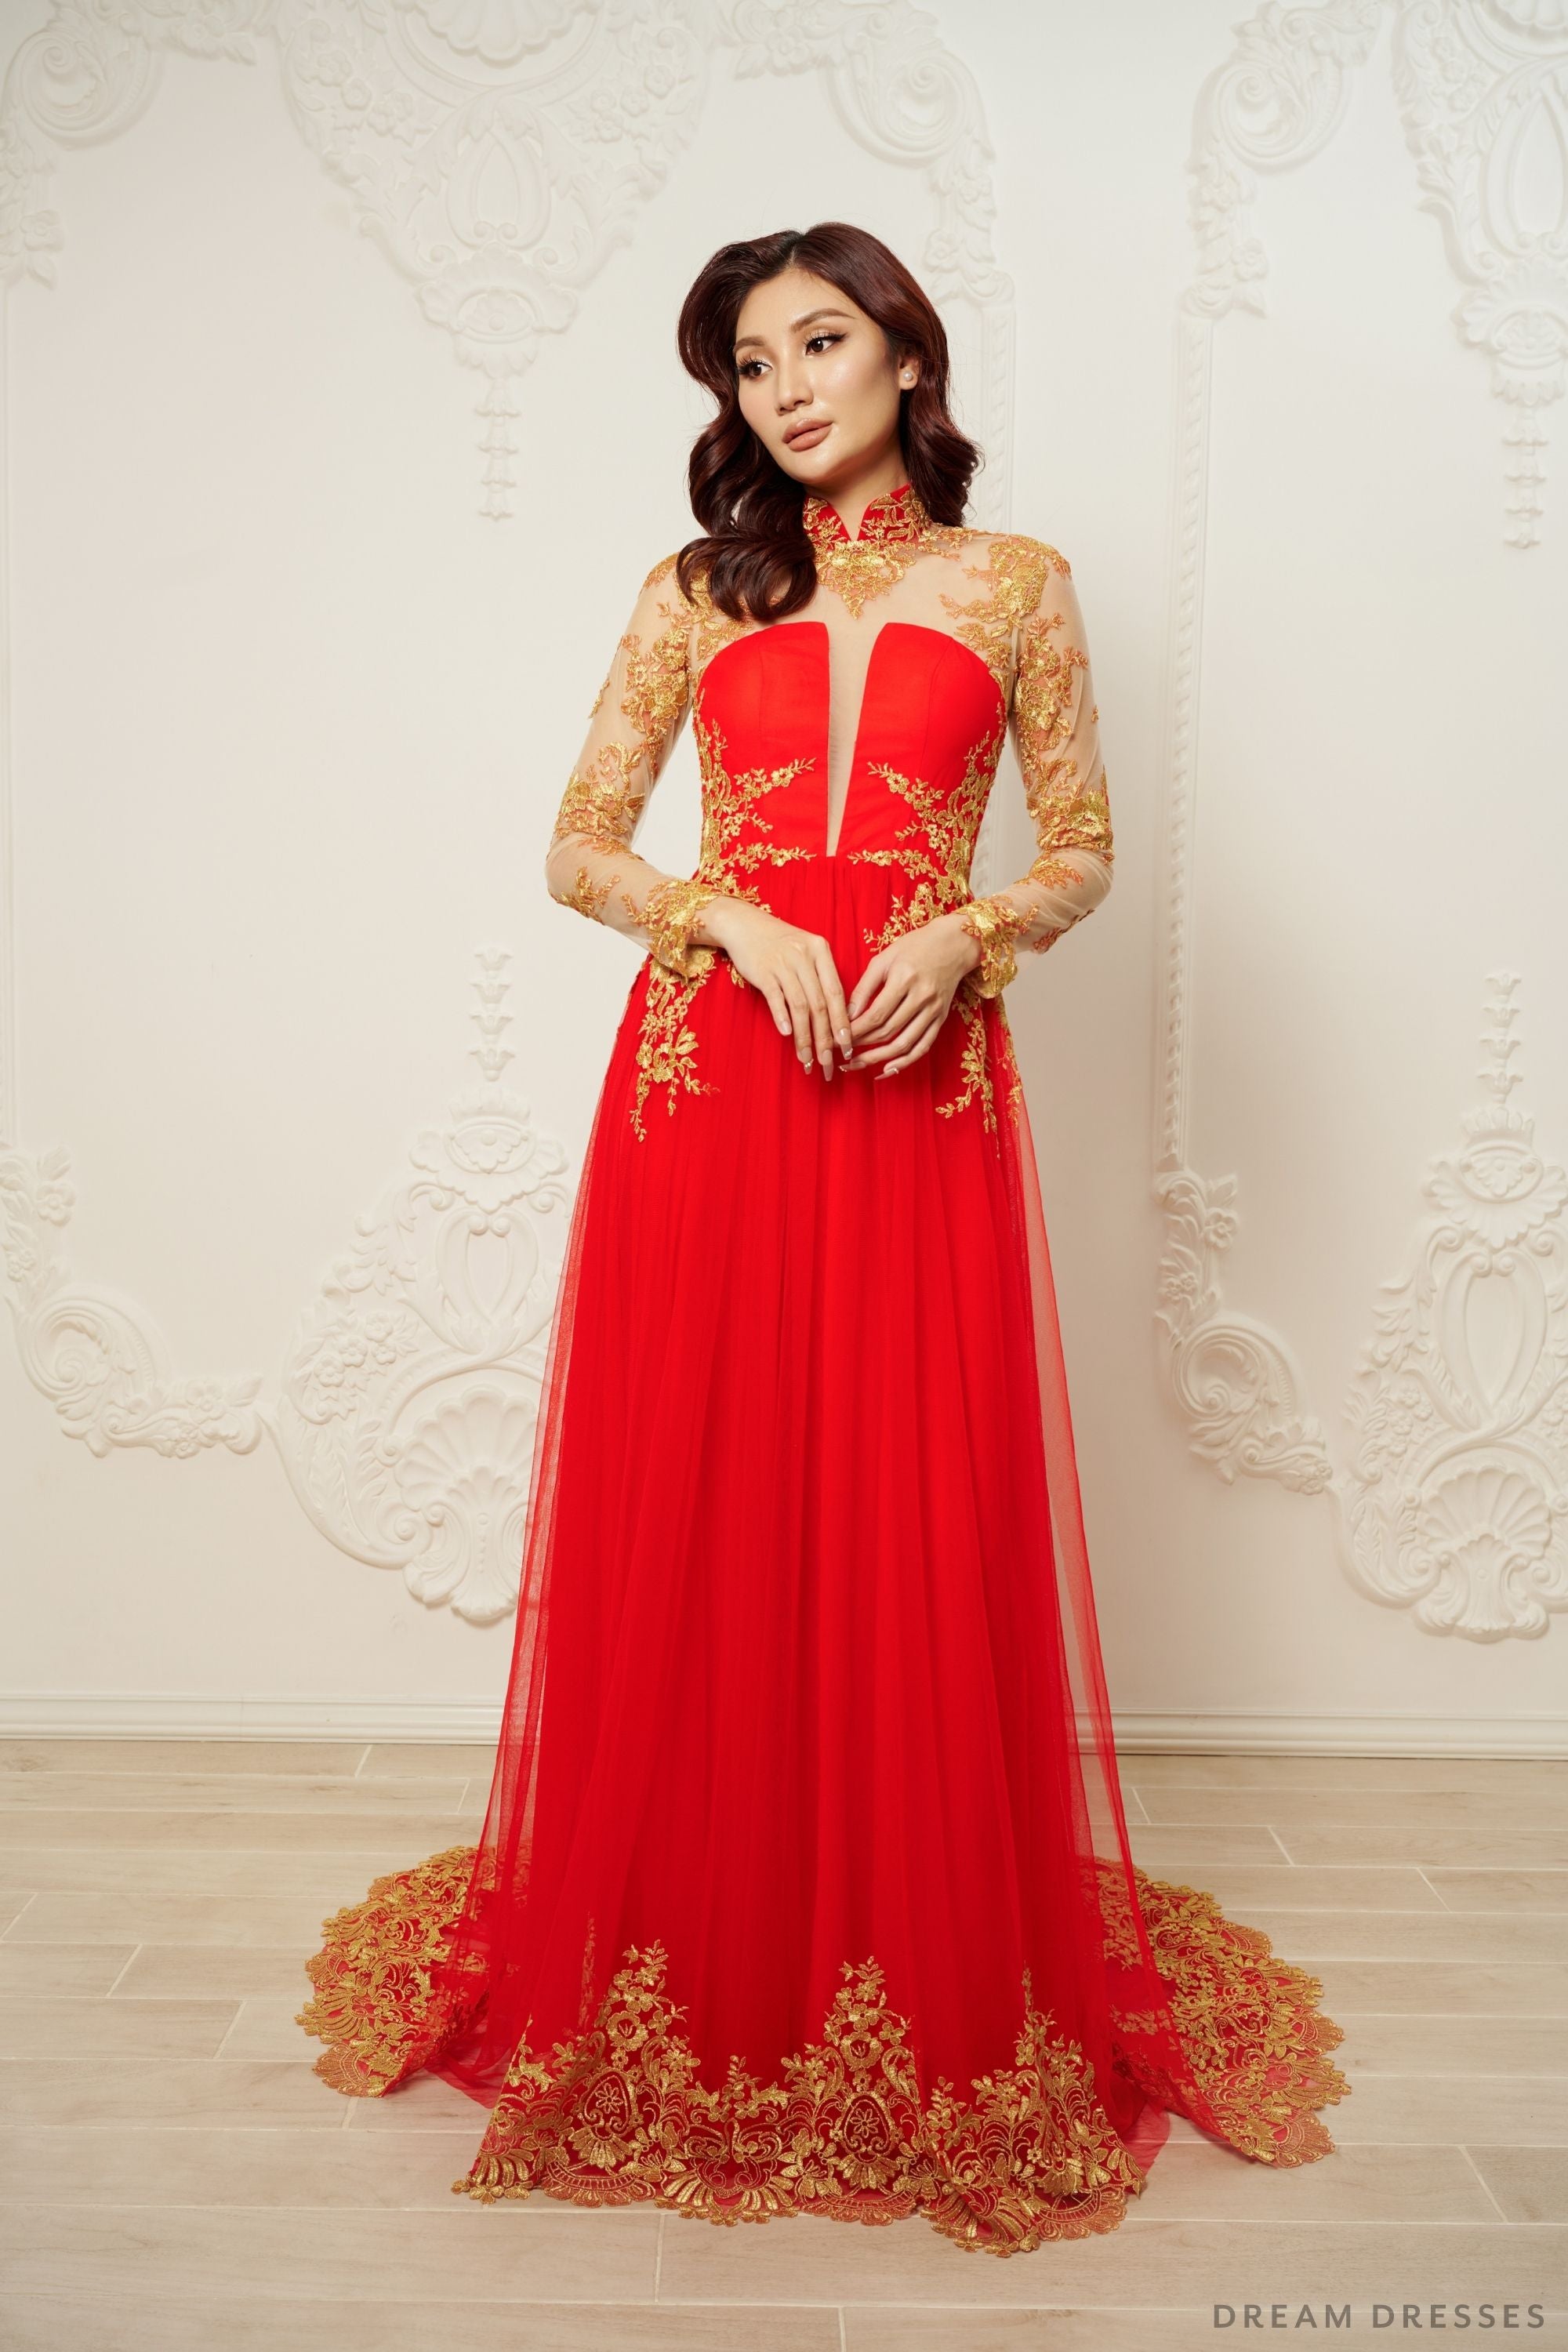 Bridal Salwar Suits - 20 Stunning Collection for Perfect Wedding Look